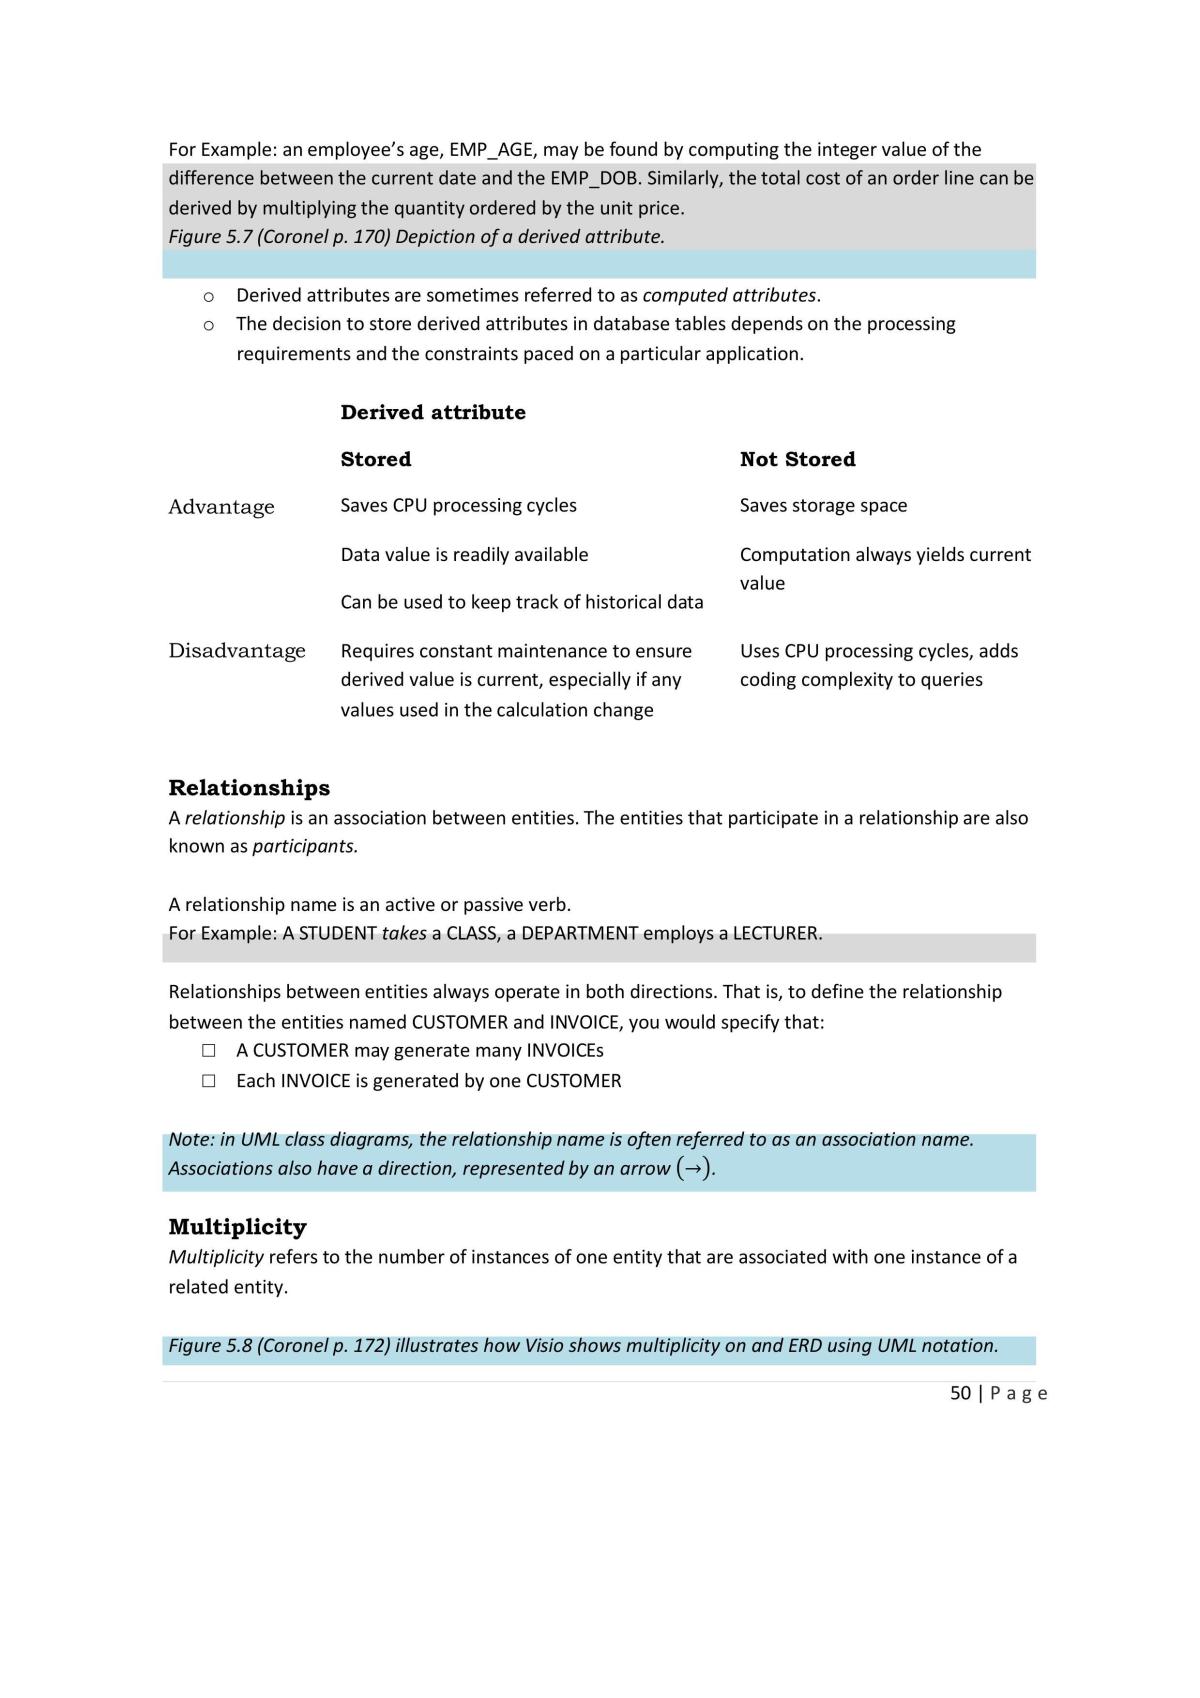 Bachelor of Science Honours in Computing Course Notes - Page 50